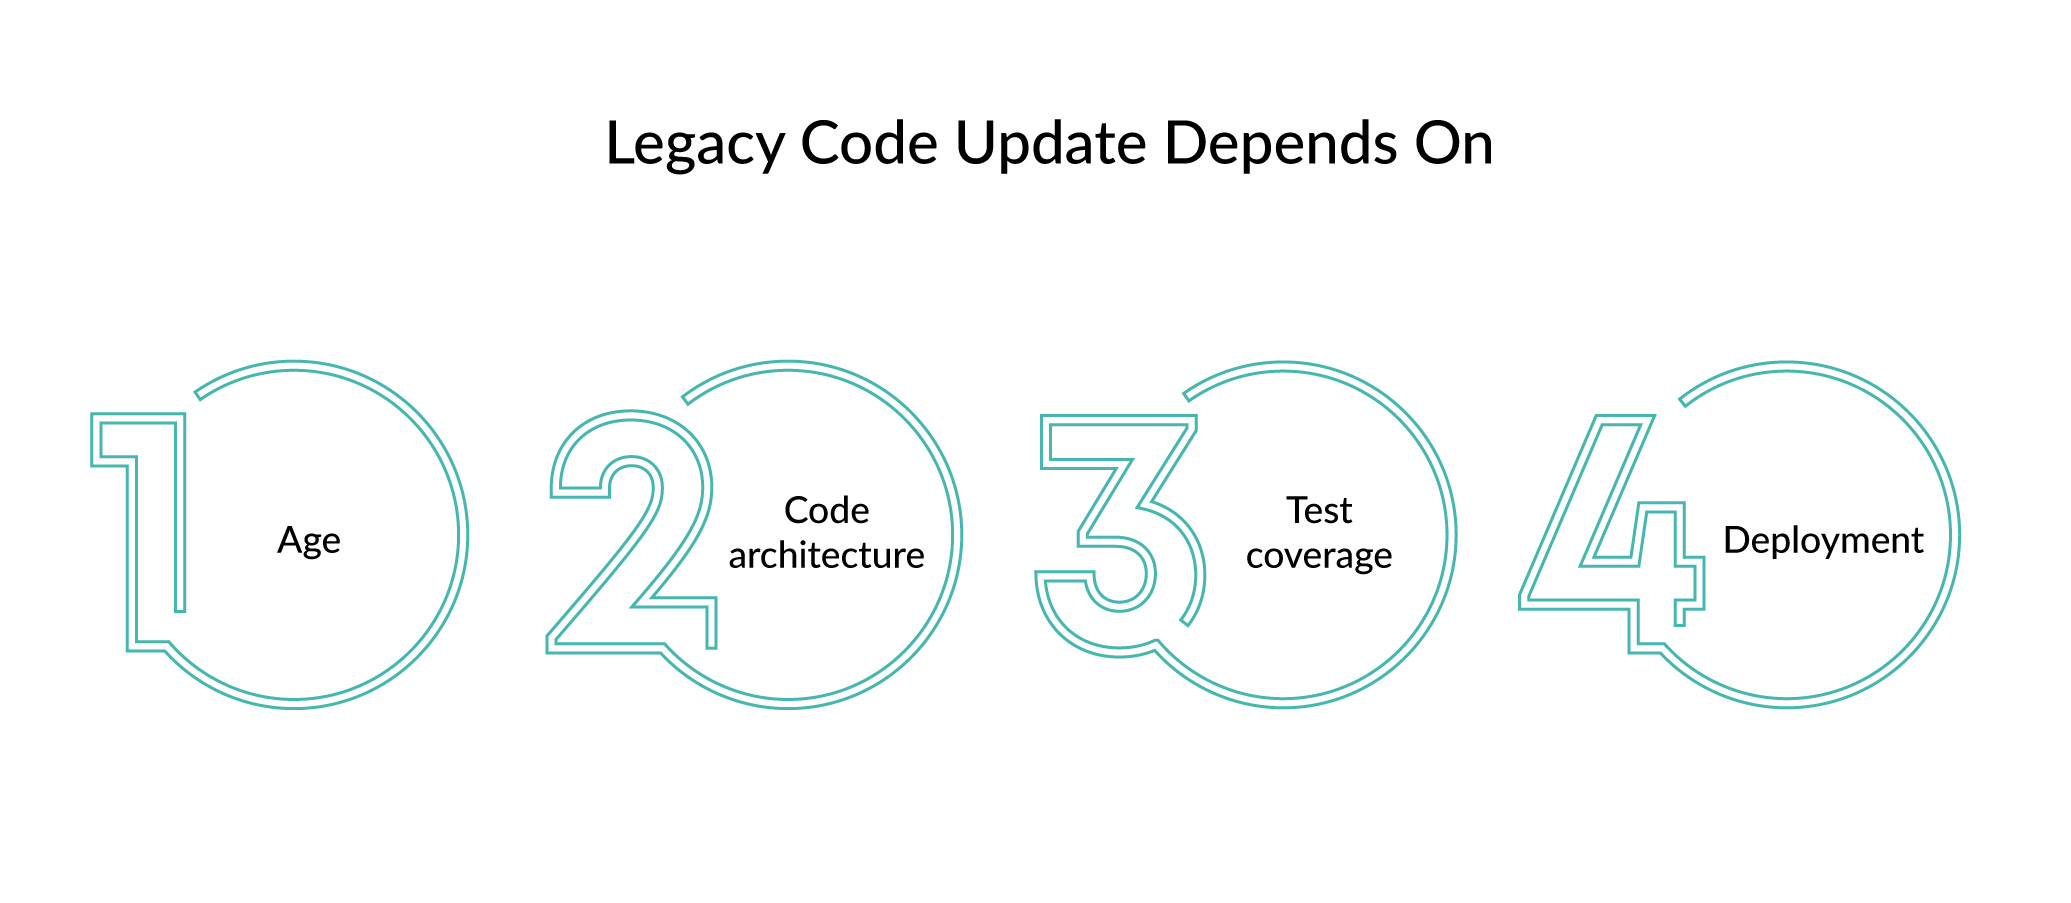 Legacy code update depends on